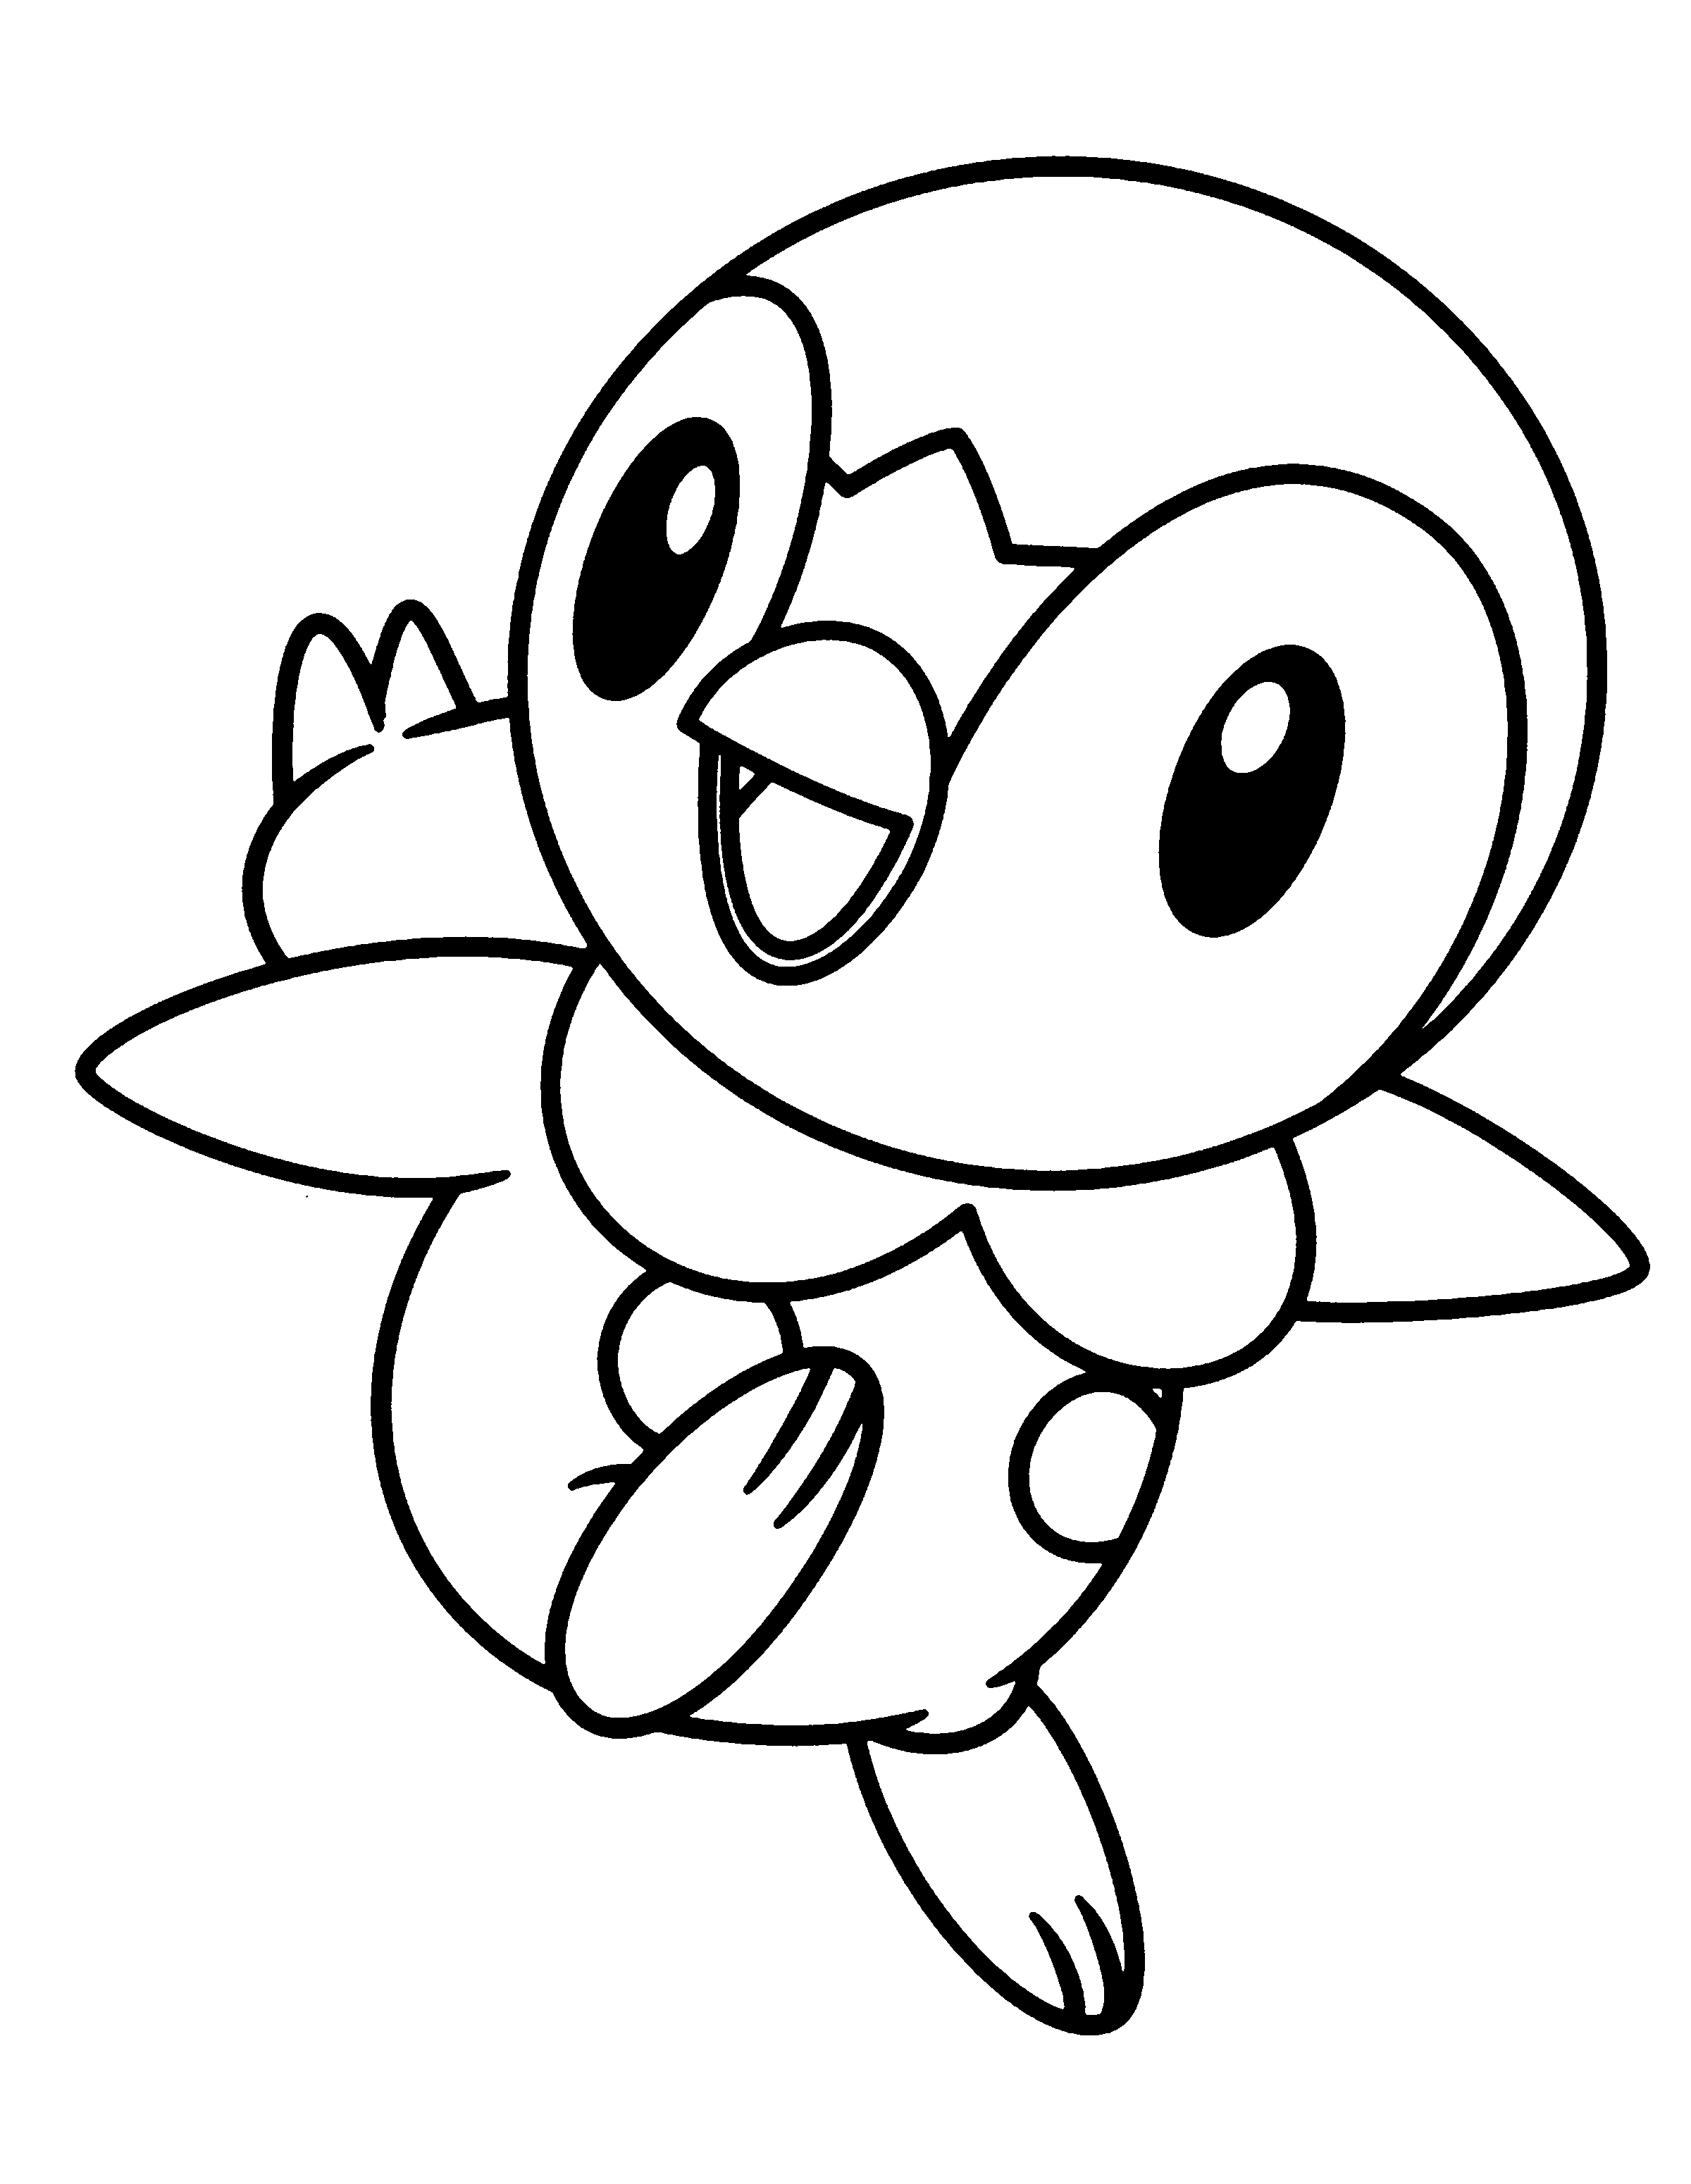 piplup coloring pages - High Quality Coloring Pages